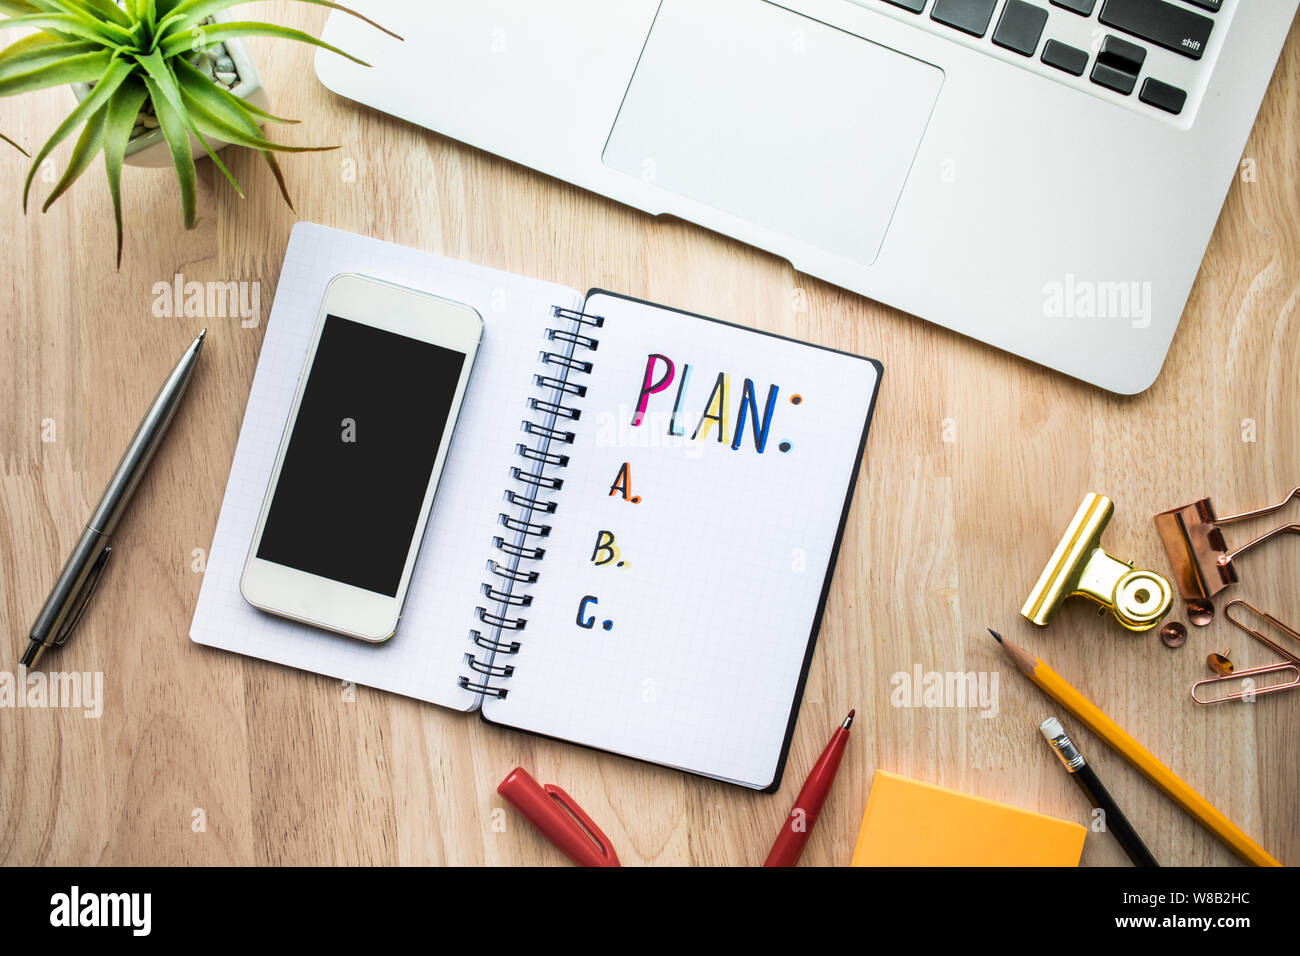 Business plan concepts with notepad paper on wooden table and supplies.flat lay design Stock Photo